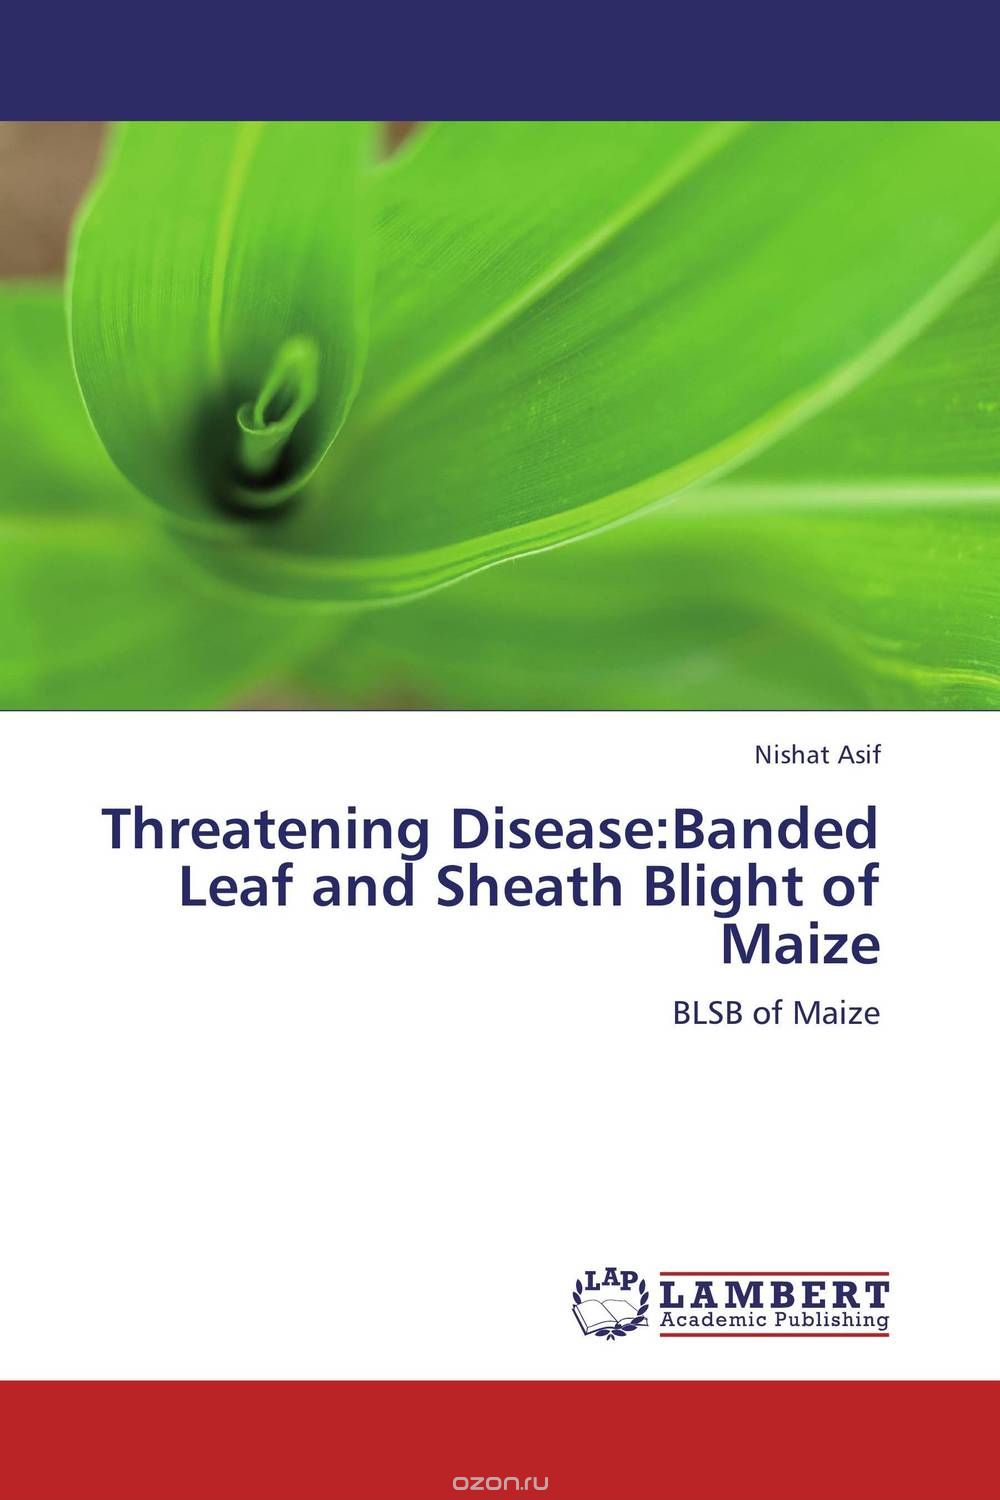 Threatening Disease:Banded Leaf and Sheath Blight of Maize